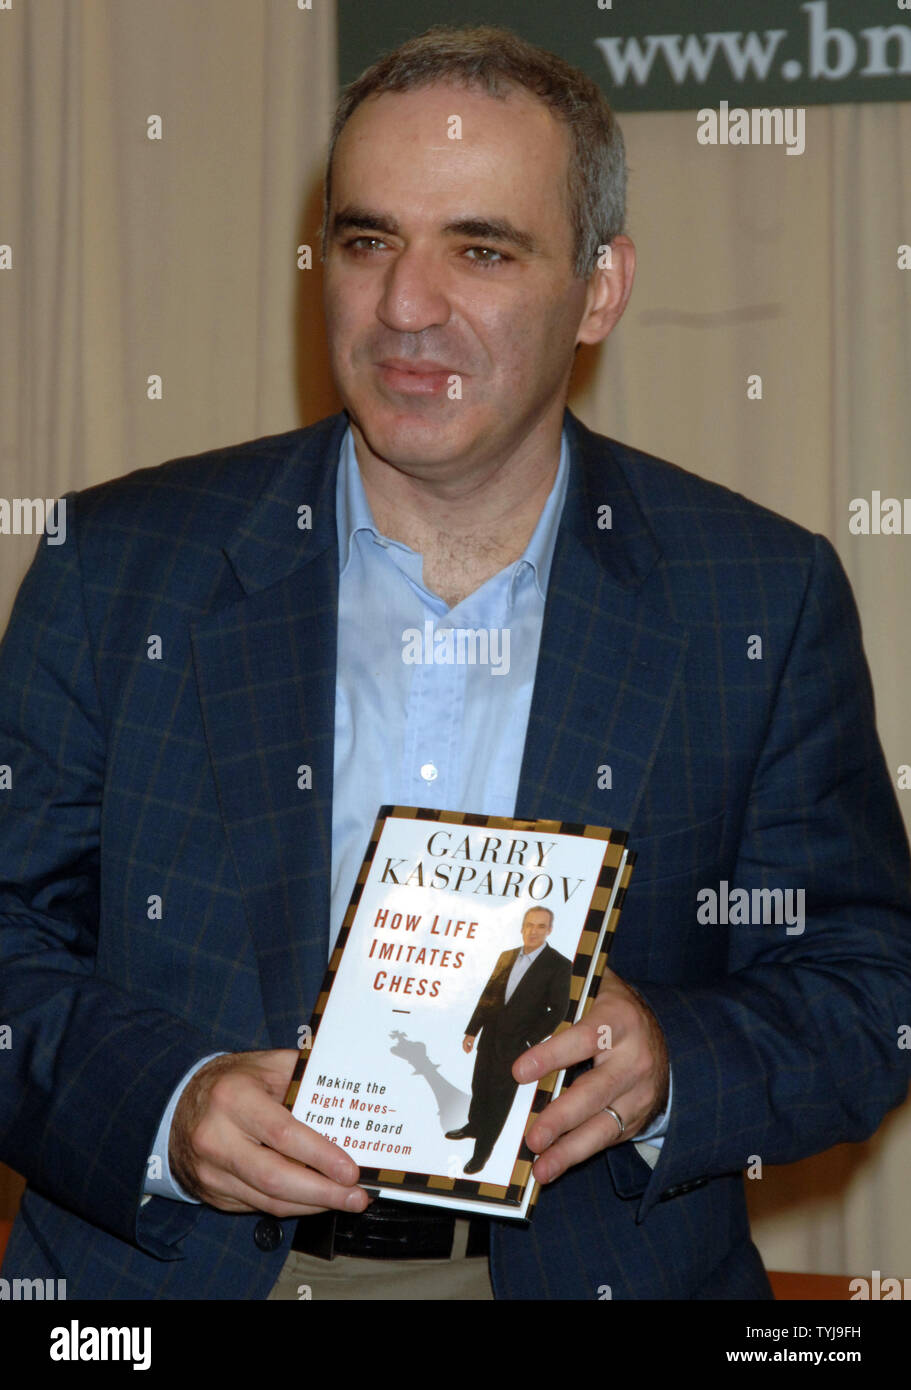 How Life Imitates Chess: Making the Right Moves, from the Board to the  Boardroom by Garry Kasparov